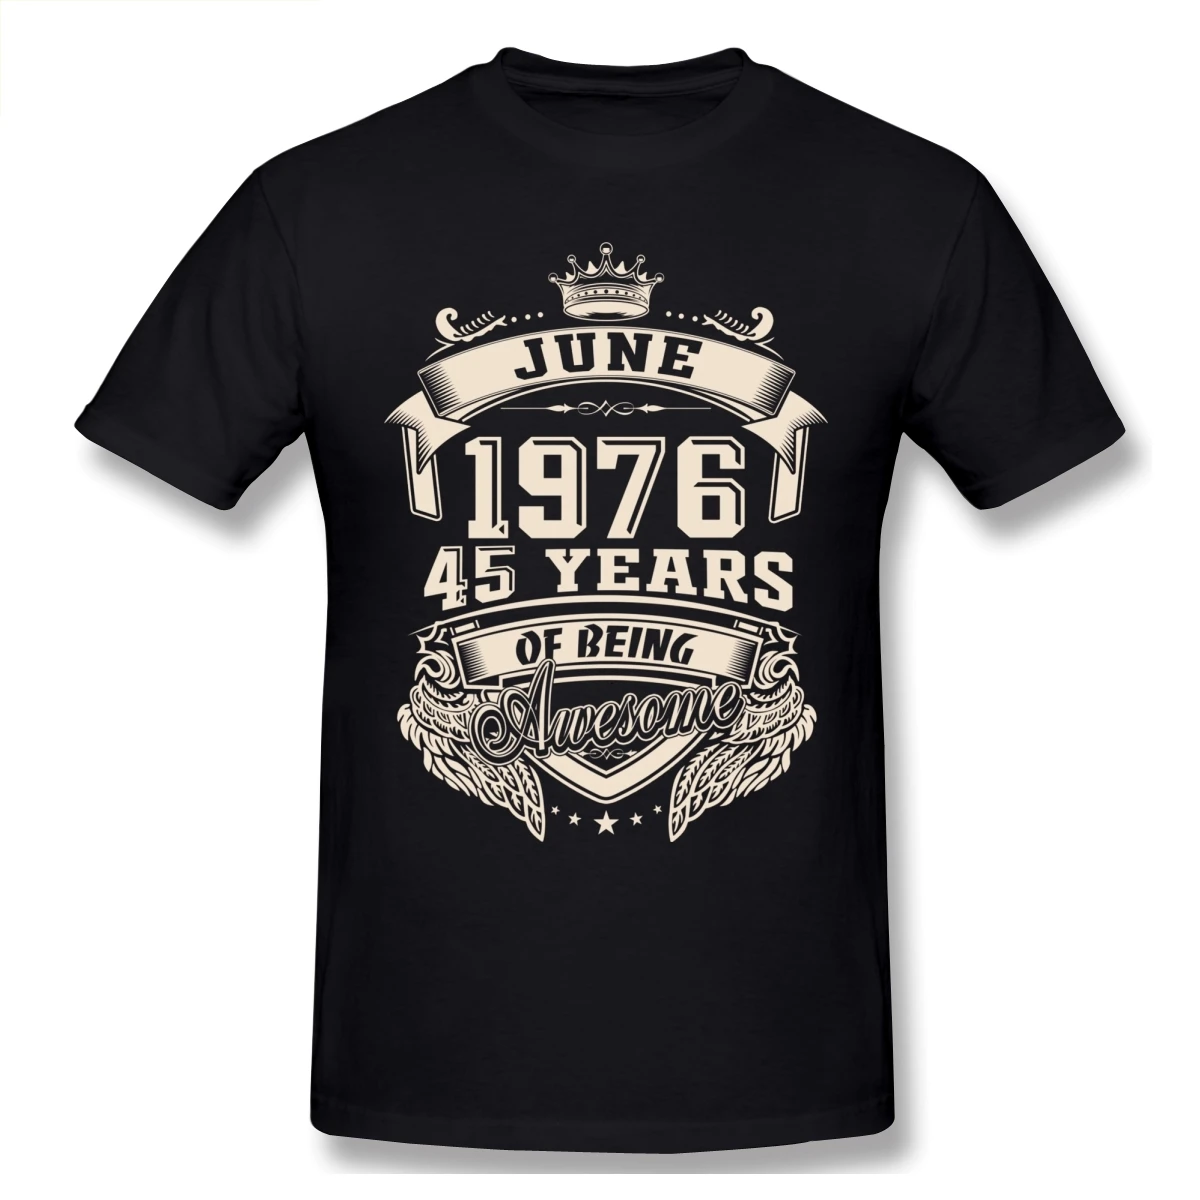 

Born In June 1976 45 Years Of Being Awesome T Shirt Big Size Cotton Crewneck Short Sleeve Custom Tshirt